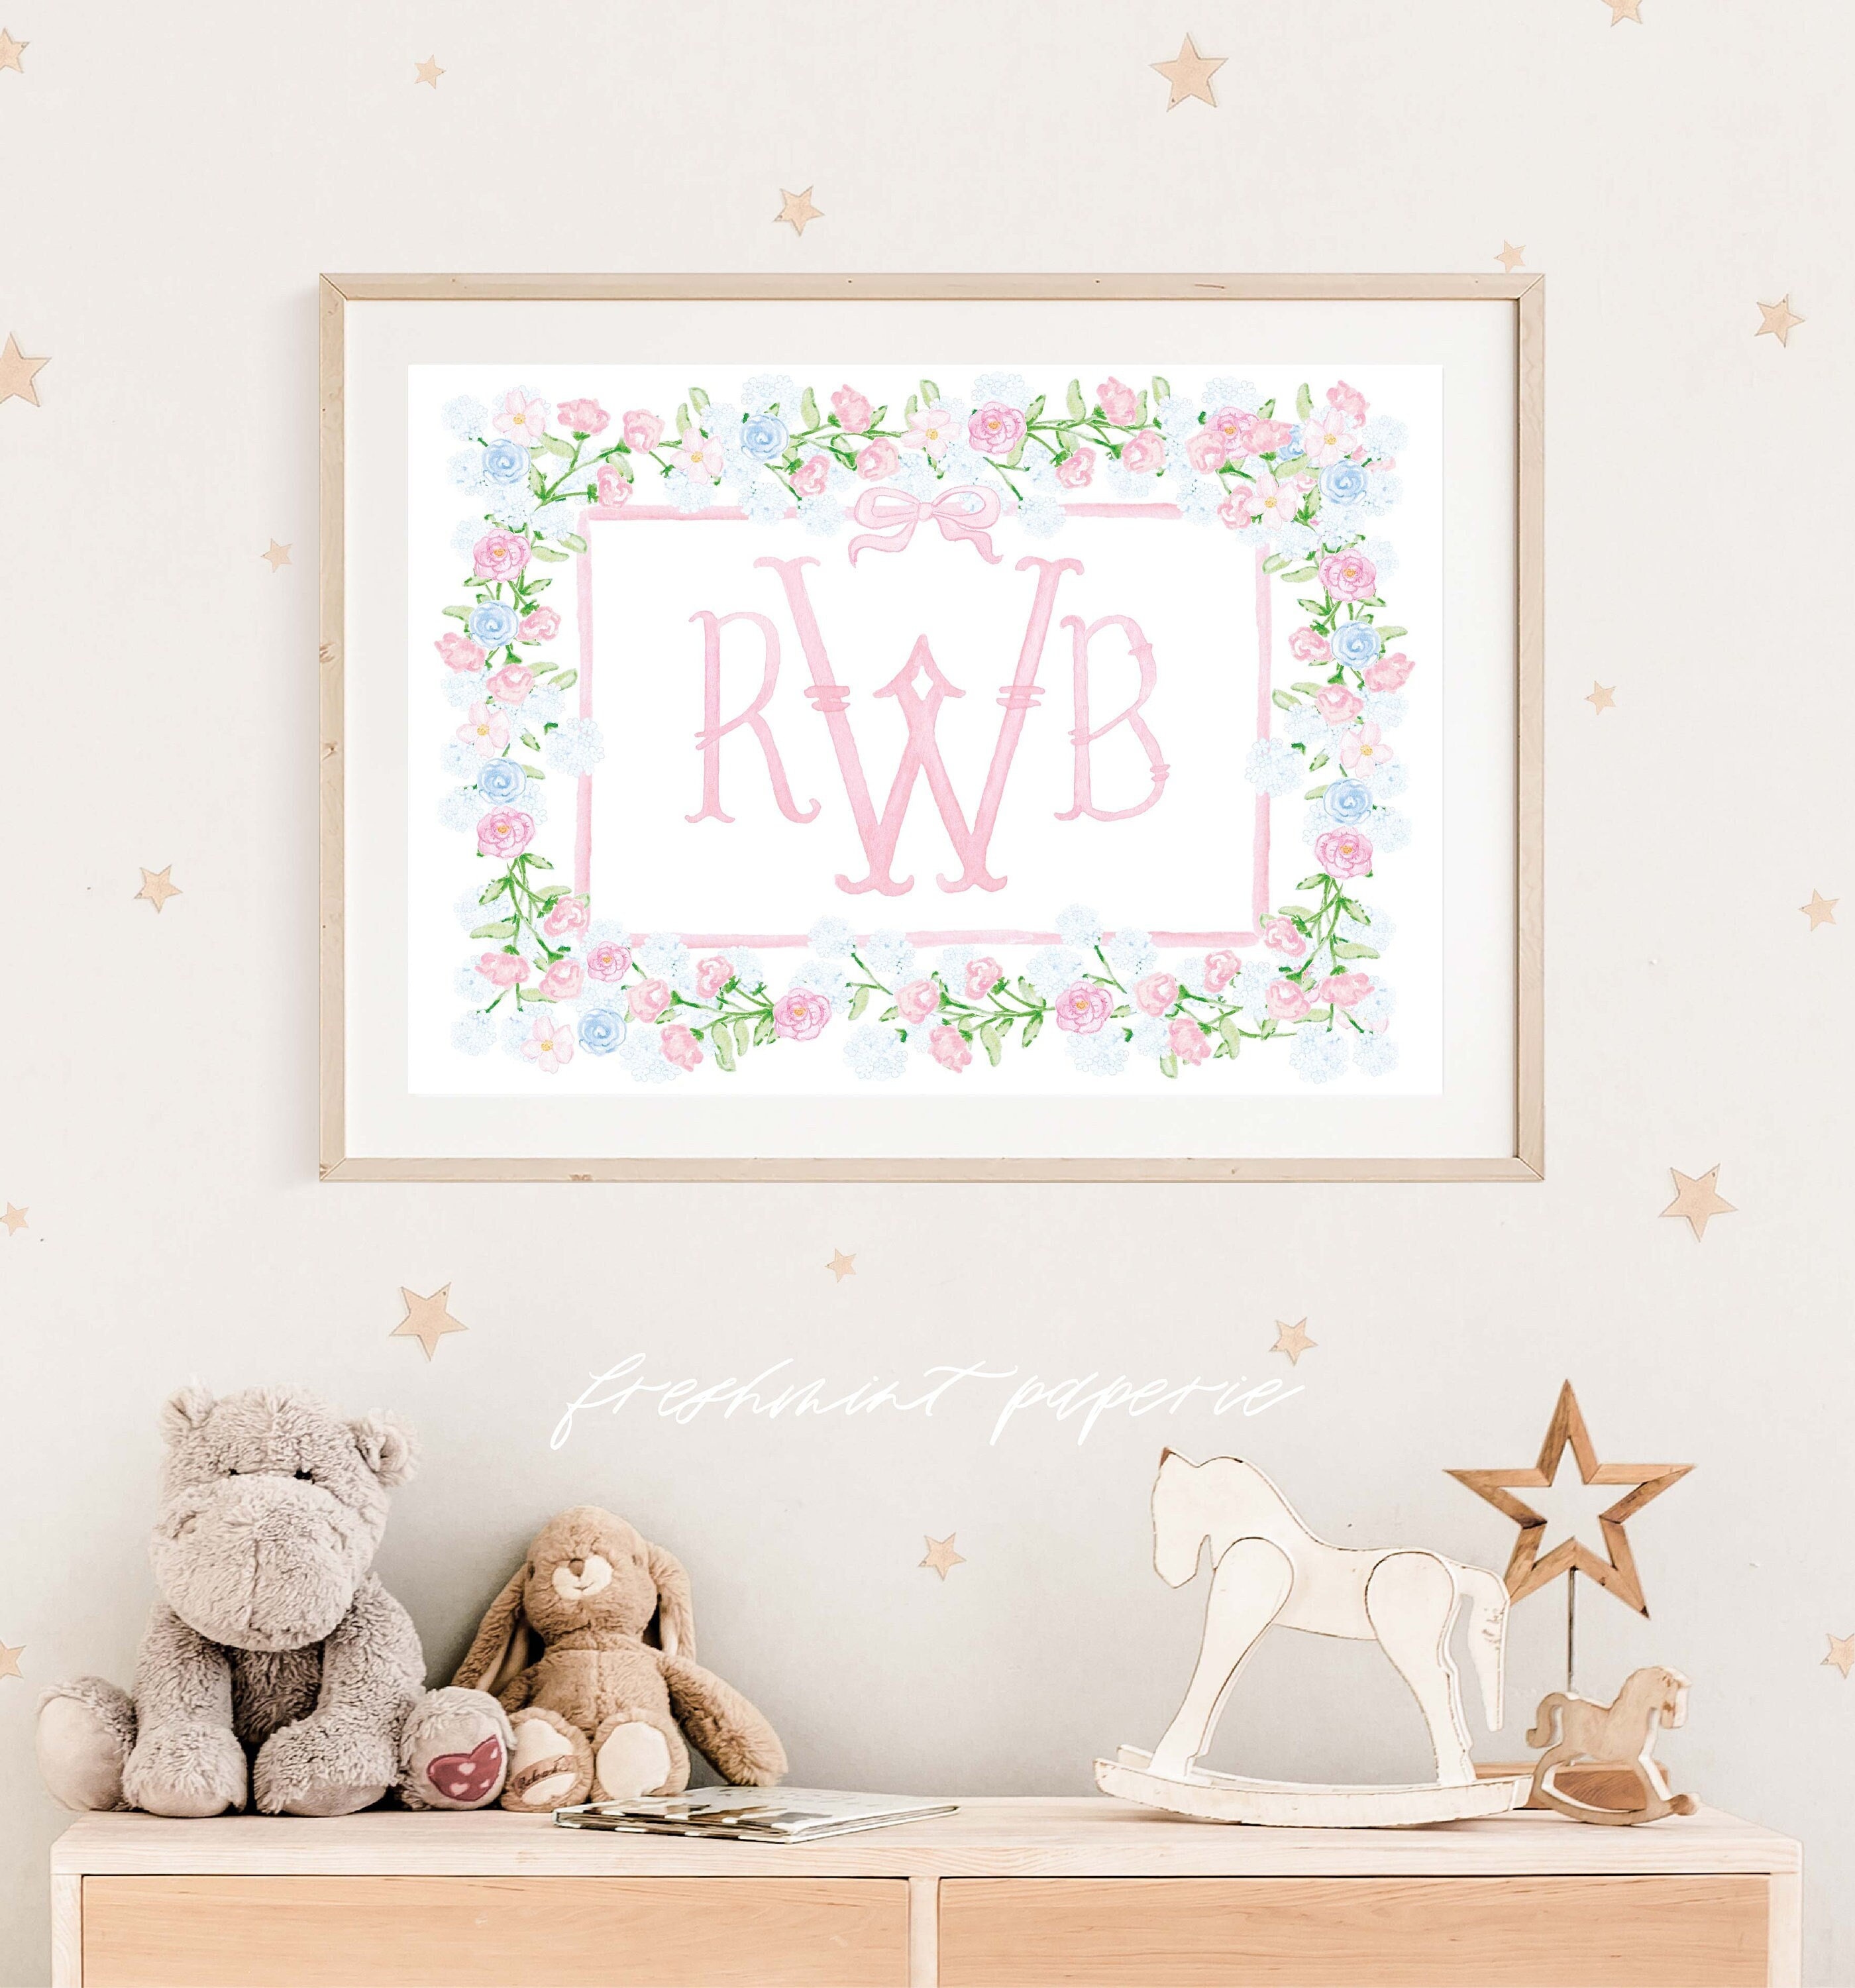 Ribbon & Bows Nursery Stencil, Home Decor Wall Painting Stencil, Paint  Walls and Furniture, Size Options, Reusable Mylar by Ideal Stencils 